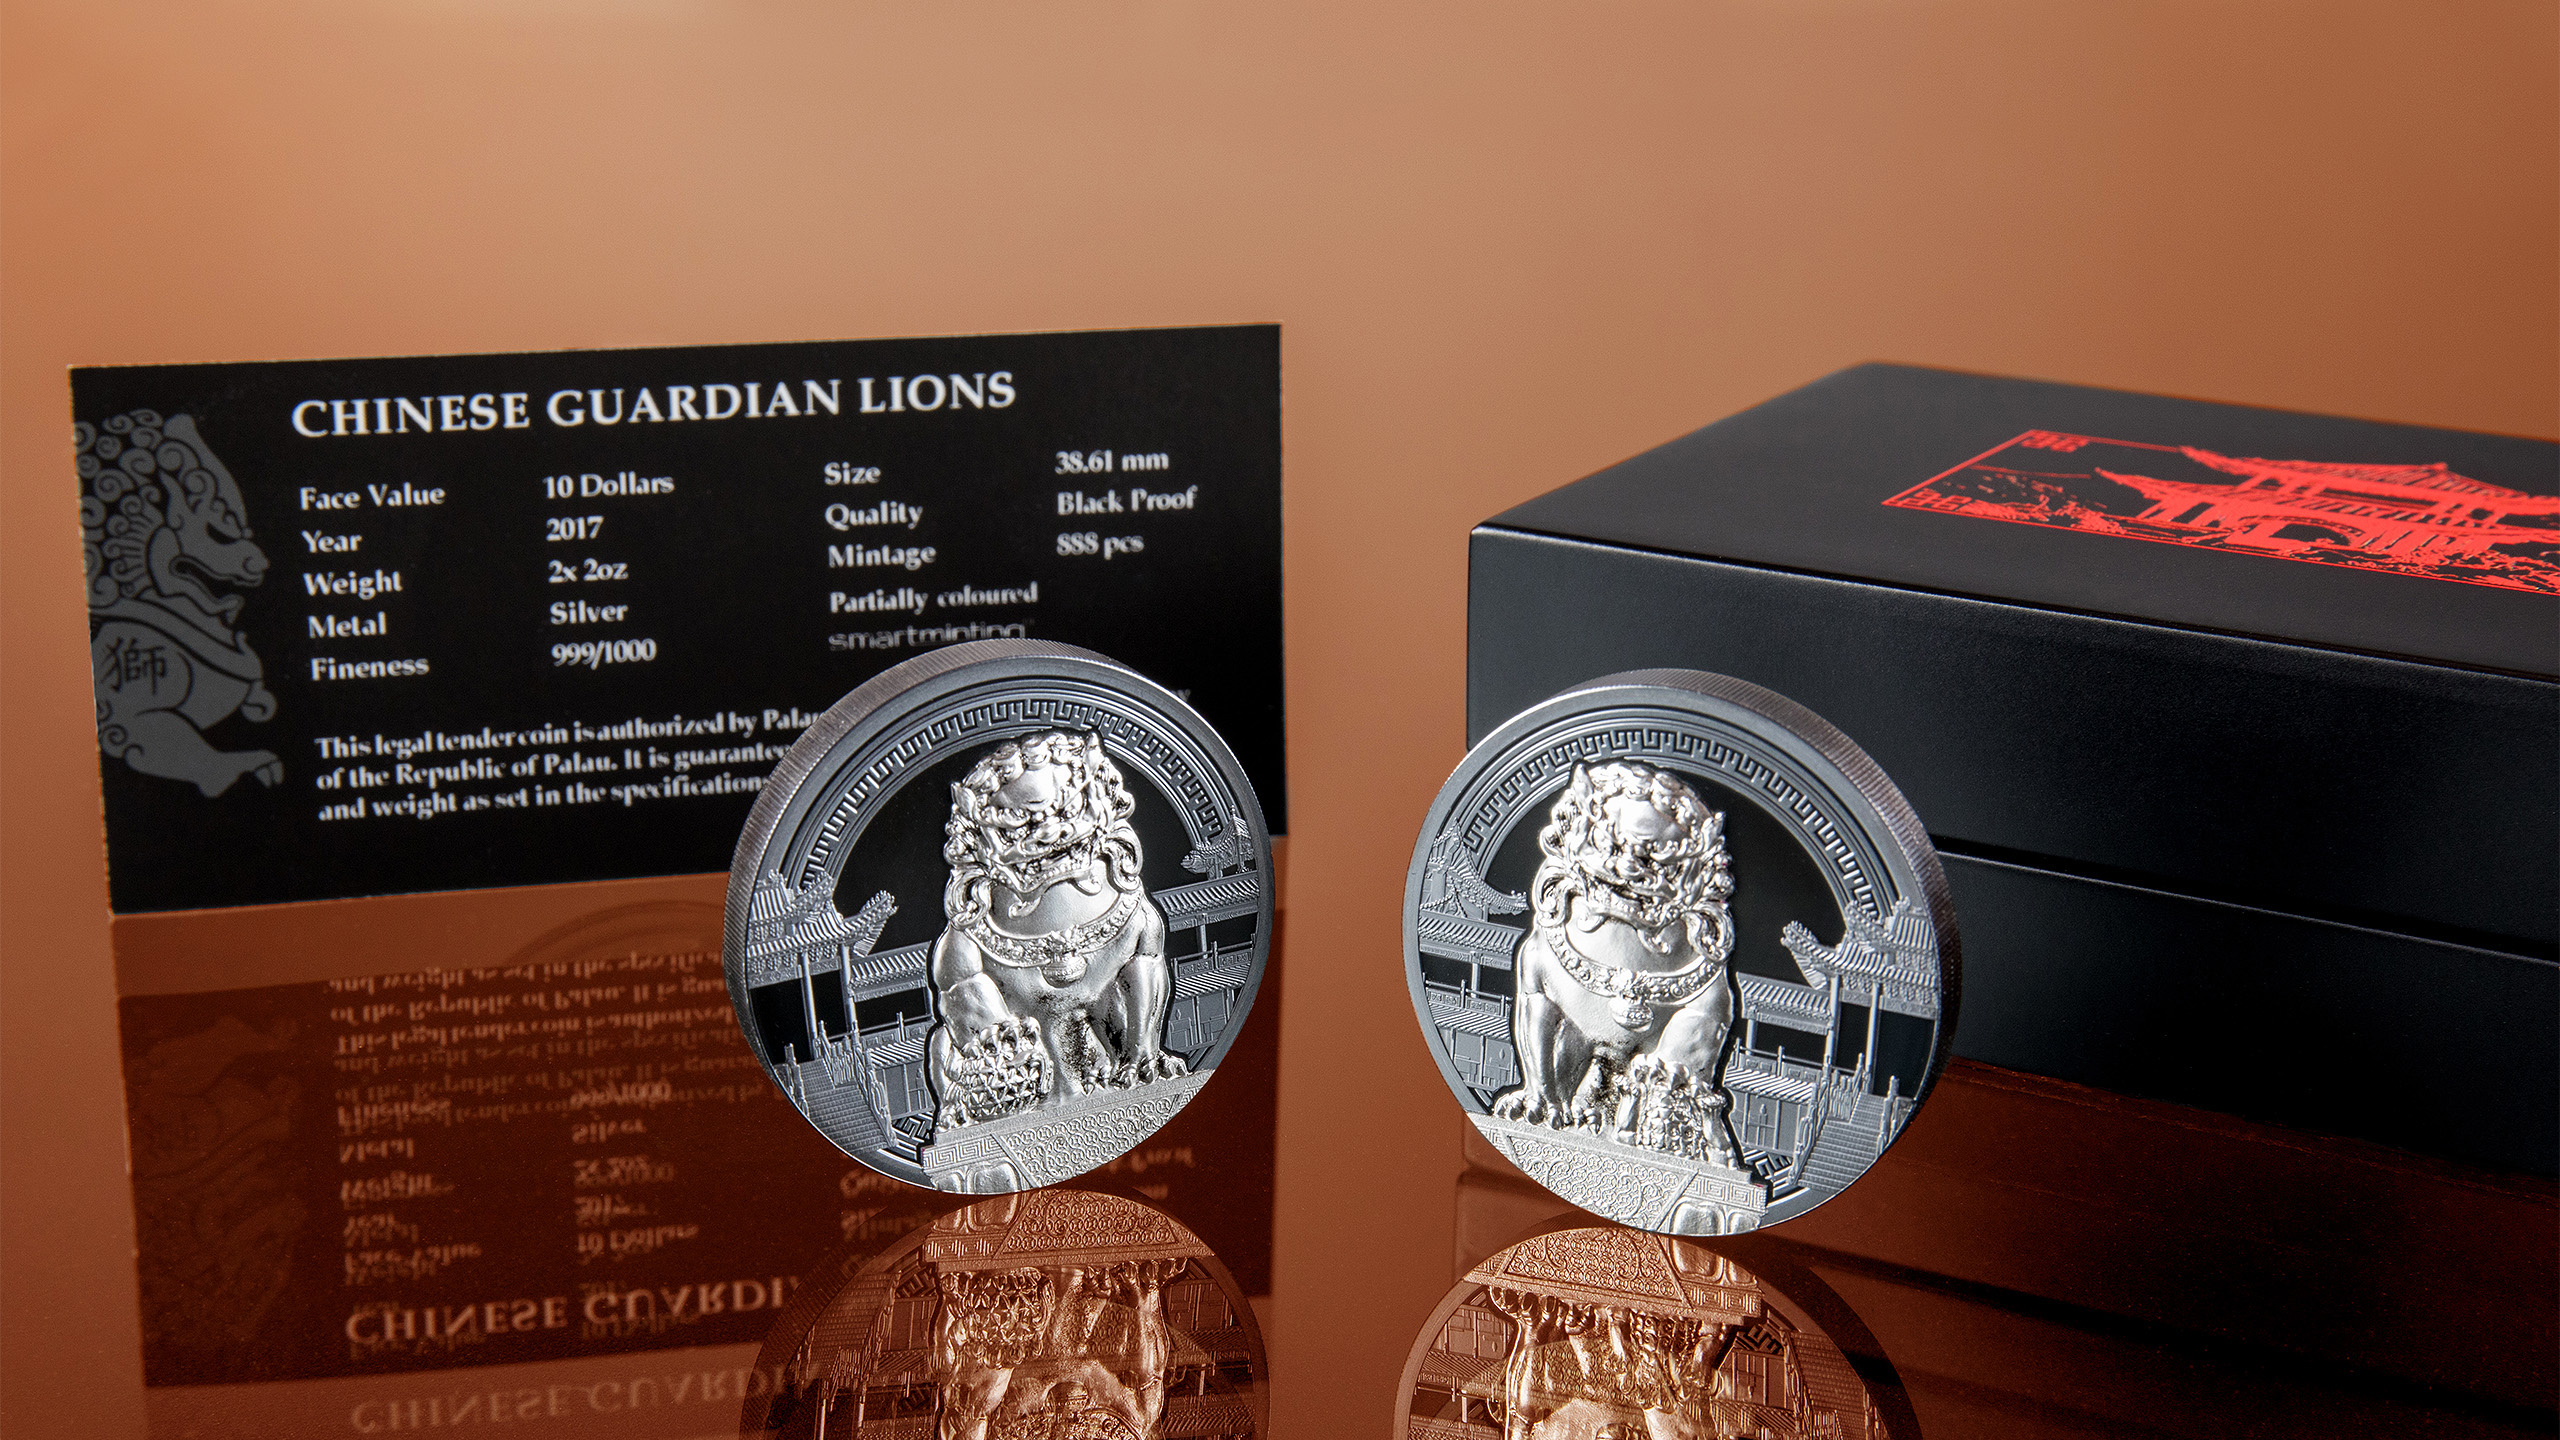 Chinese guardian lions, imperial guardian lions, foo dogs, smartminting silver coin set by cit coin invest liechtenstein 2018